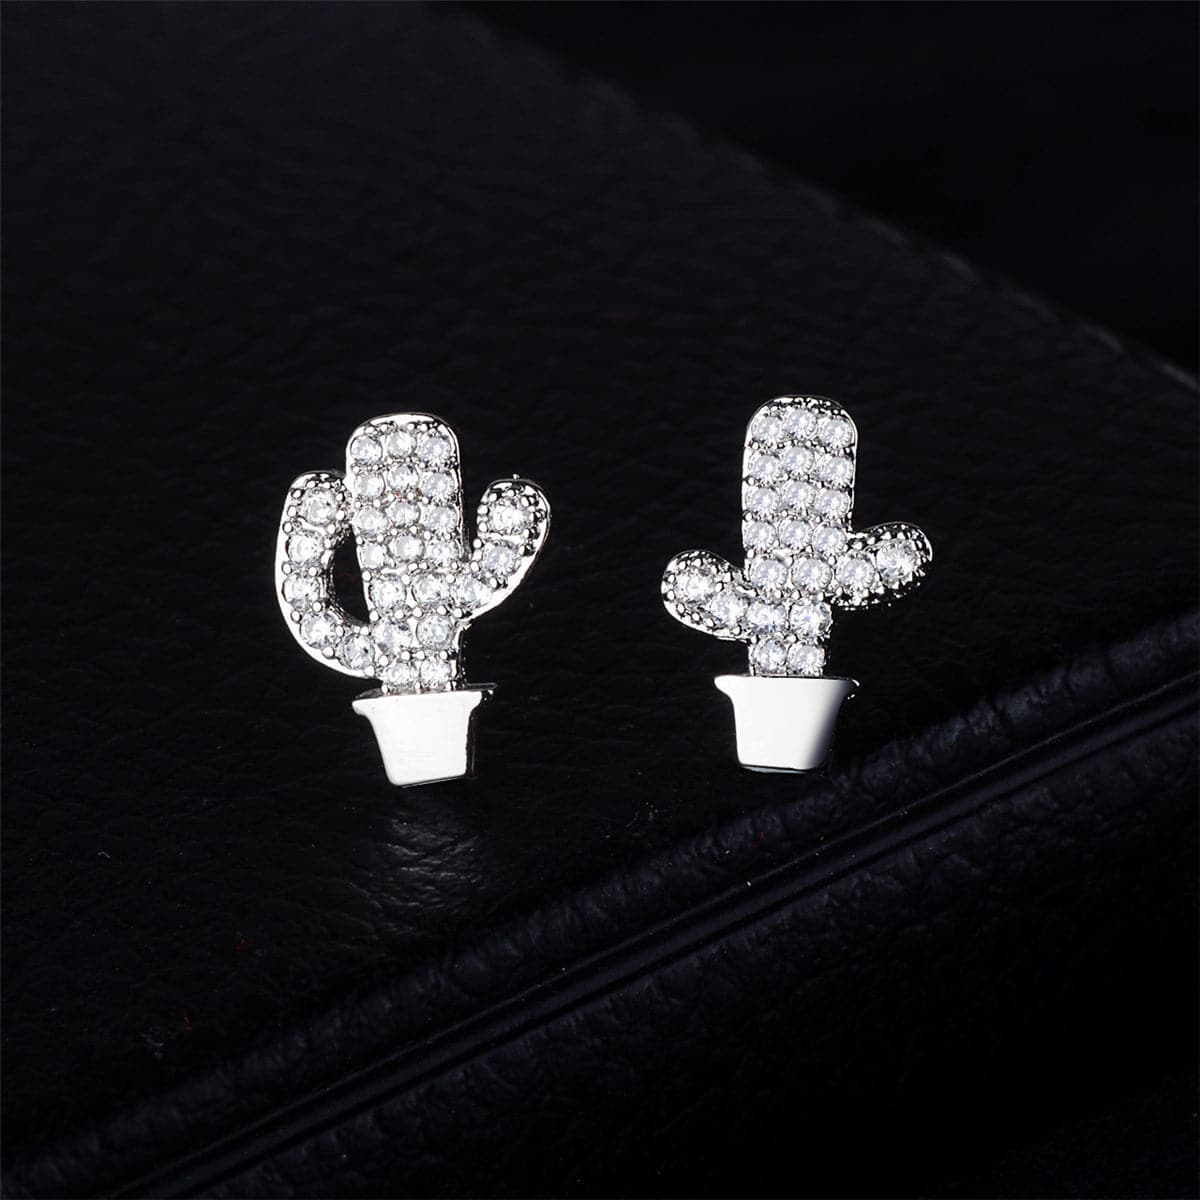 Cubic Zirconia & Silver-Plated Potted Cactus Stud Earrings